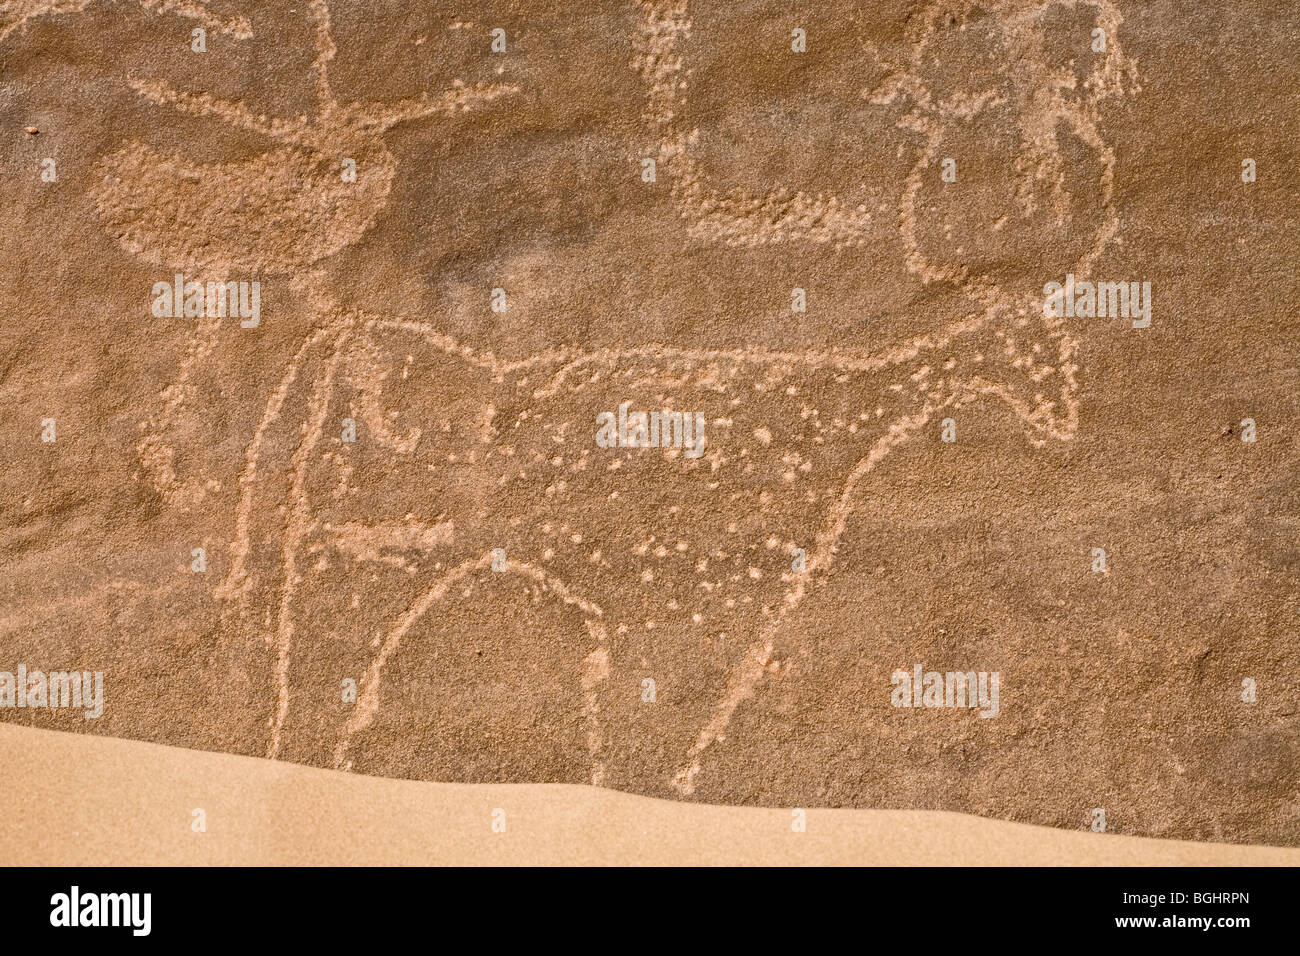 Close up of image of Bull with horns at Winklers famous Rock-Art site 26 in Wadi Abu Wasil in the Eastern Desert of Egypt. Stock Photo